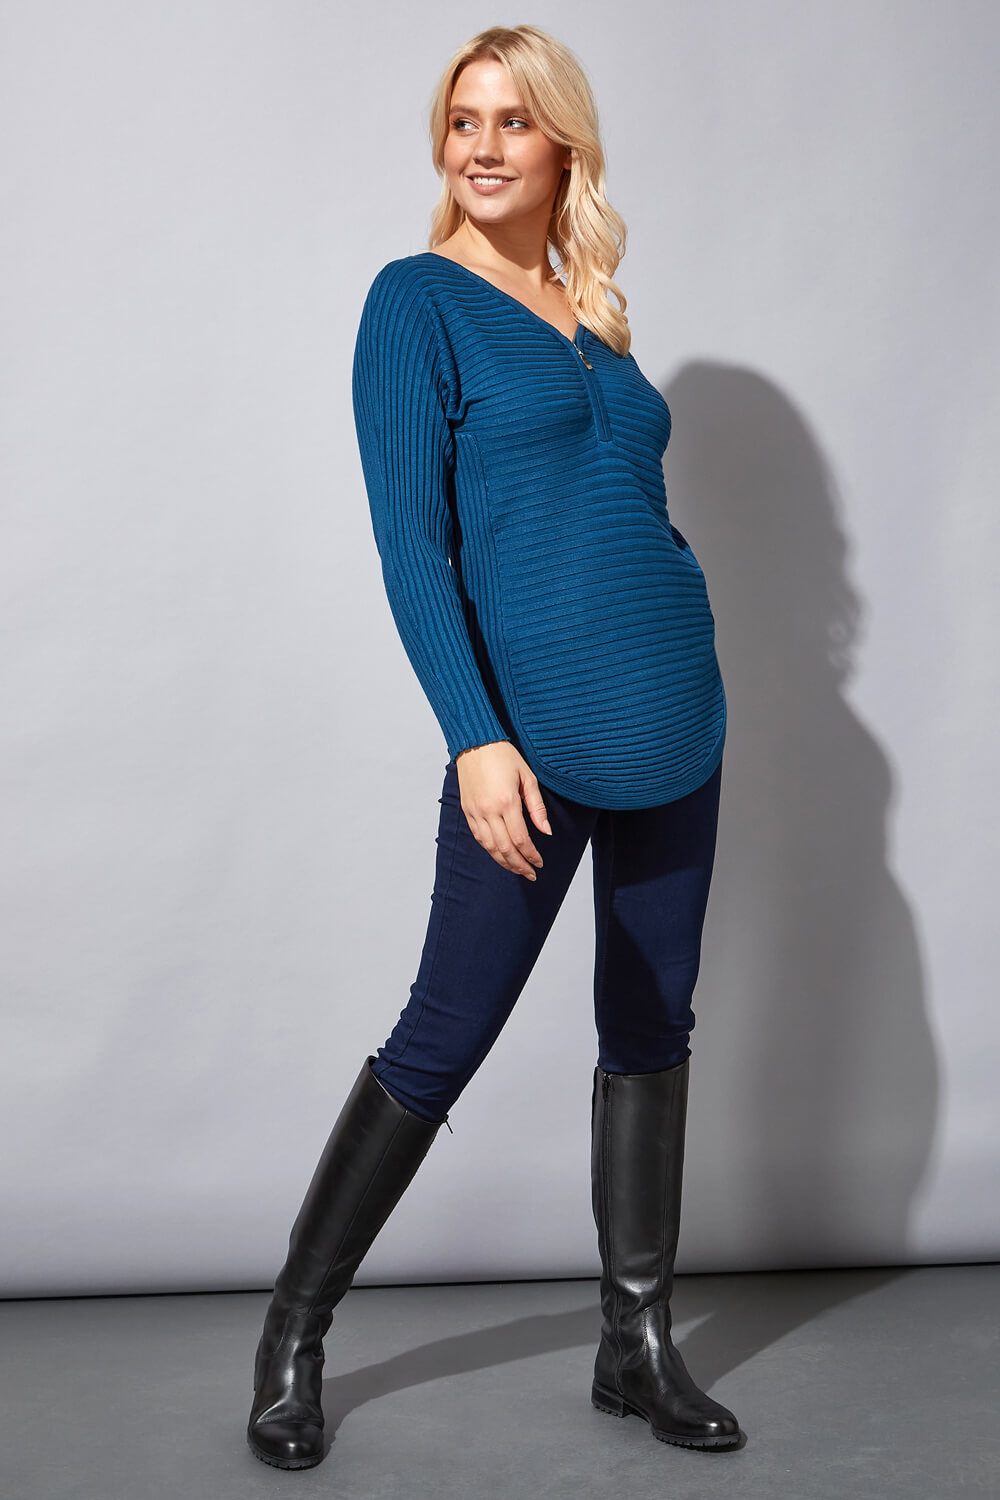 Teal Zip Front V Neck Jersey Long Sleeve Top, Image 2 of 4